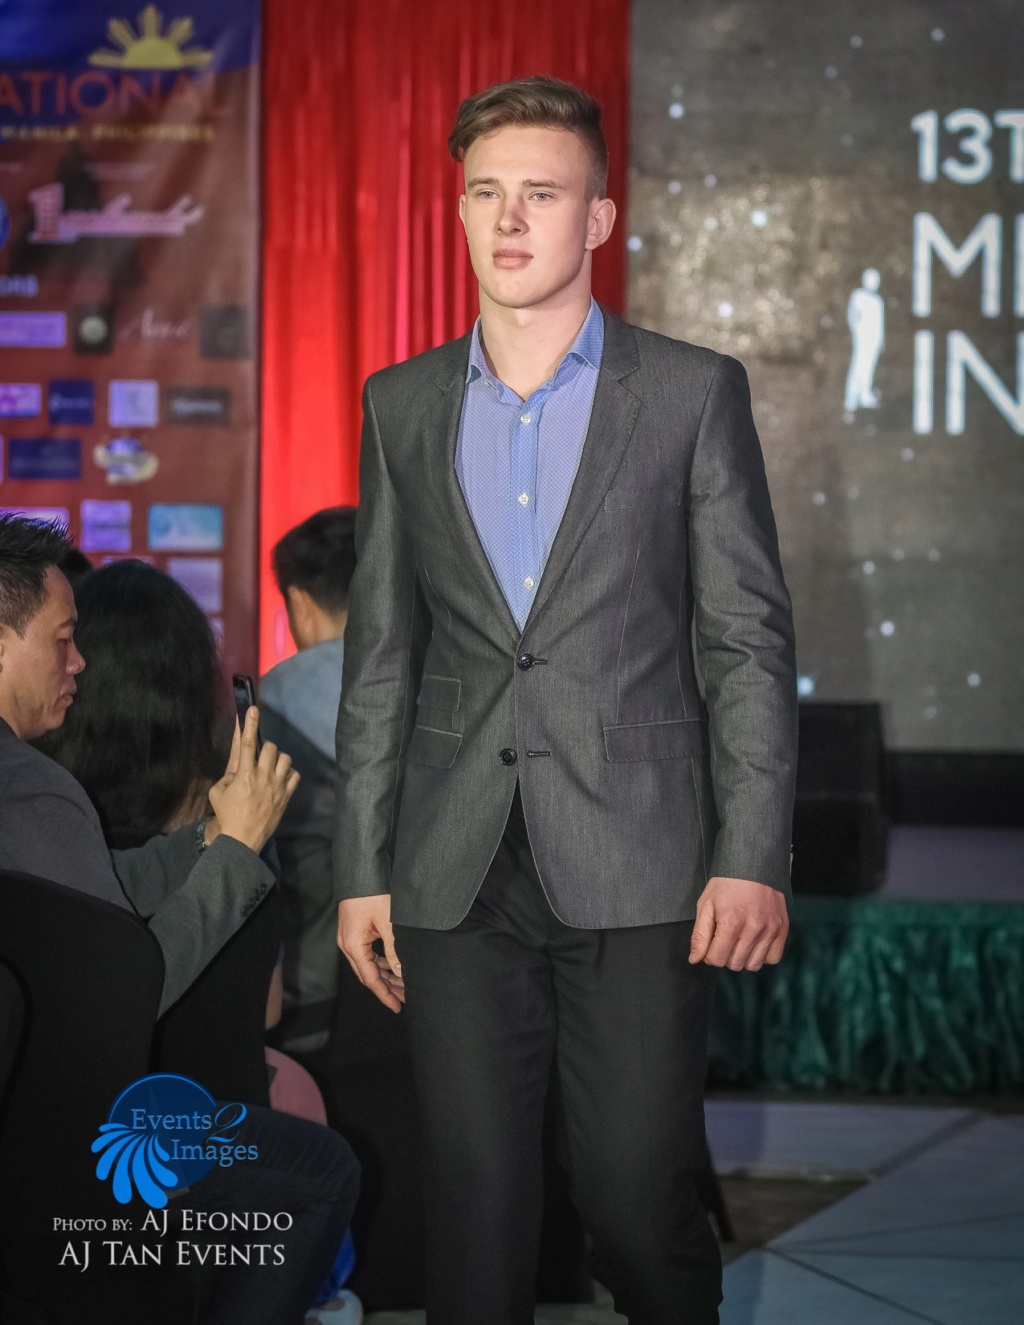 The 13th Mister International in Manila, Philippines on February 24,2019 - Page 10 52645010